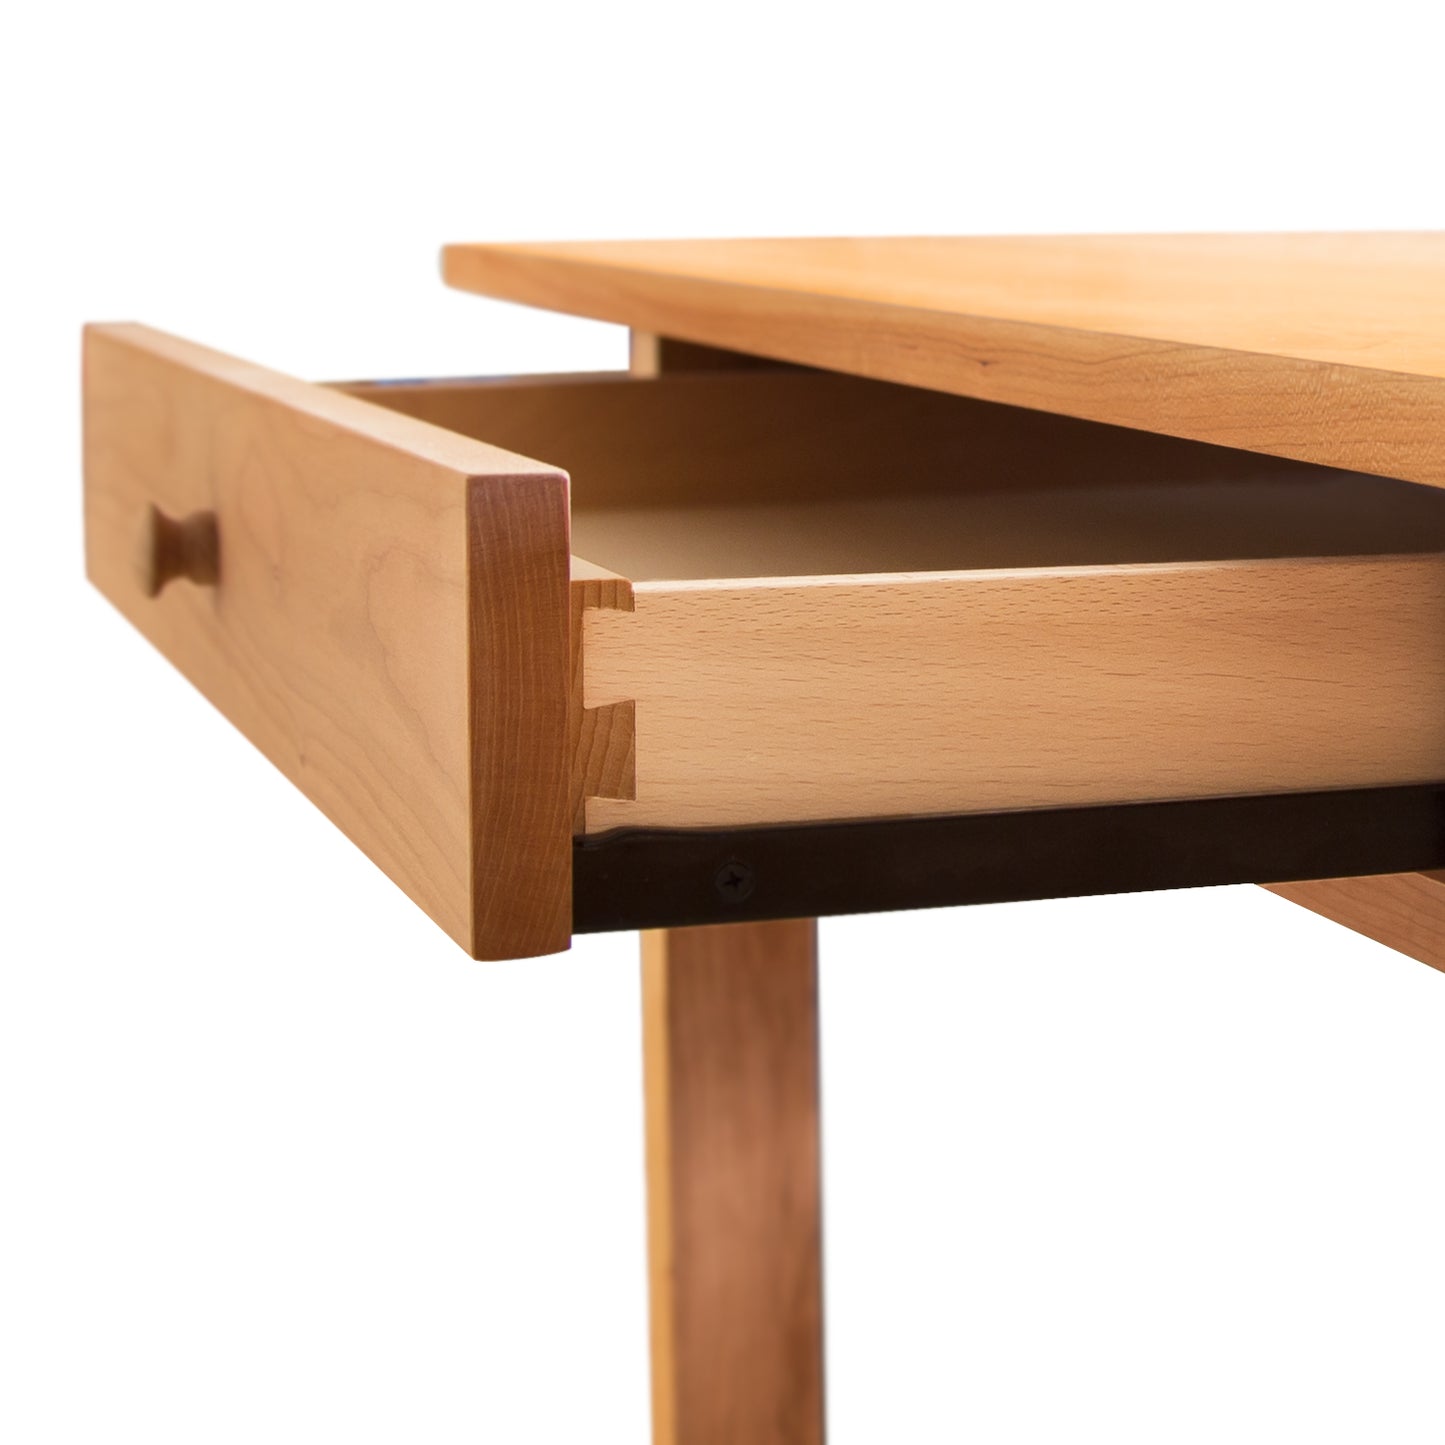 An open wooden drawer in a Vermont Furniture Designs Burlington Shaker Study Desk, showcasing its dovetail joint construction, against a white background.